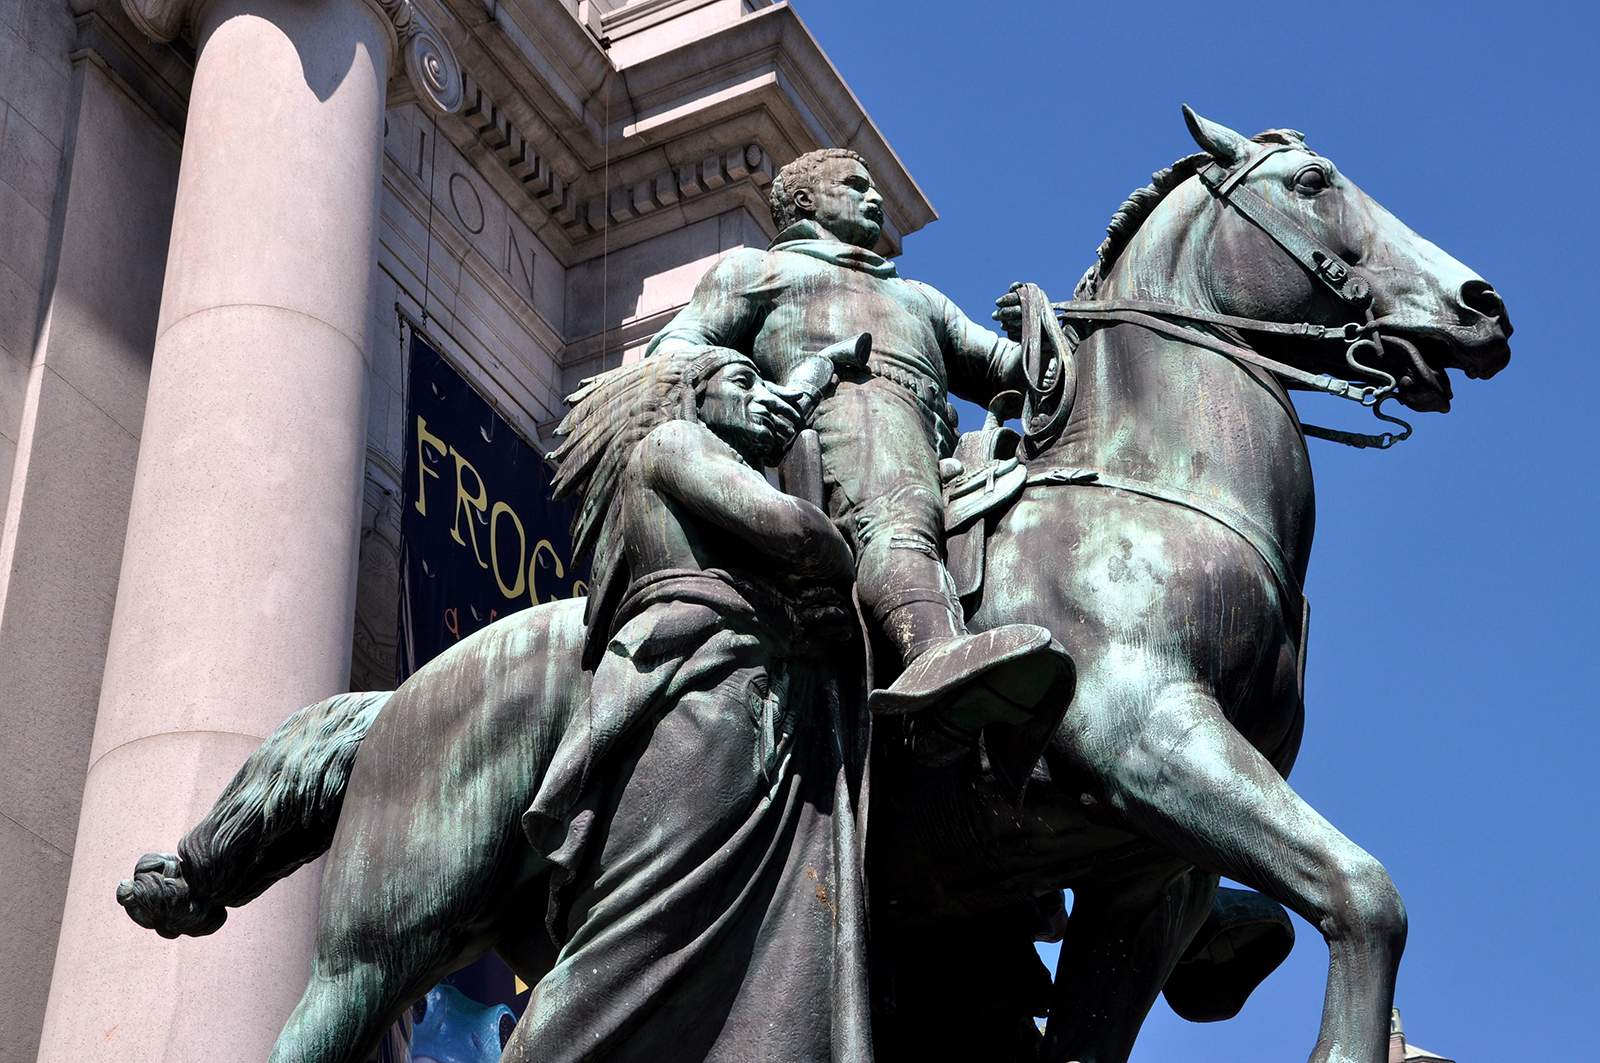 Theodore Roosevelt statue will be removed from the front steps of the Museum of Natural History